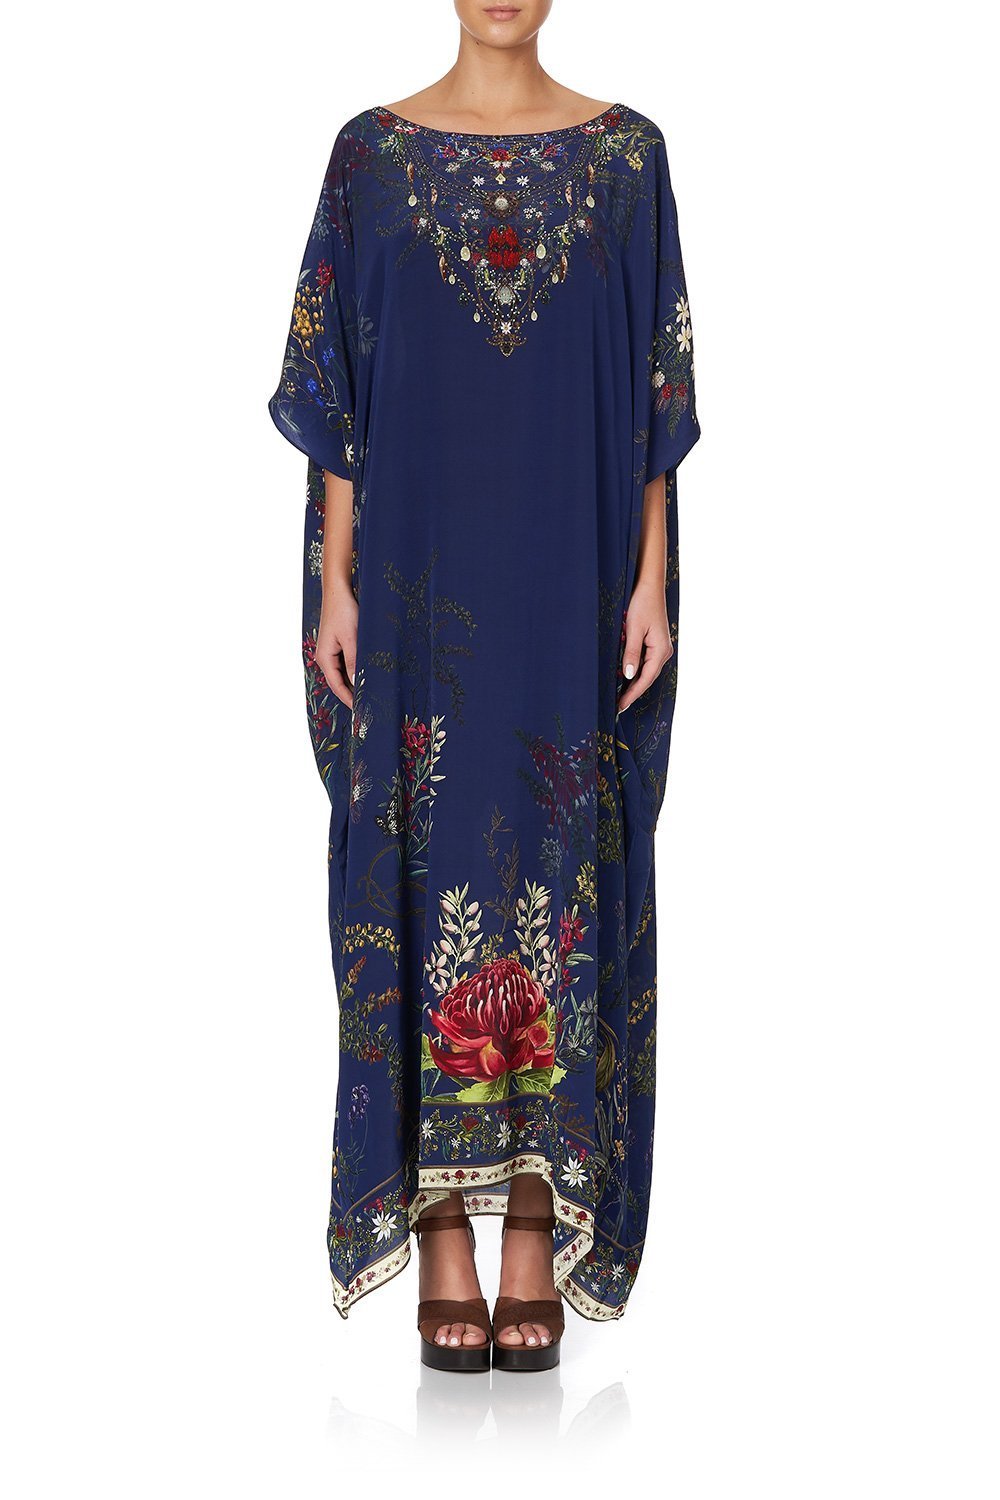 ROUND NECK KAFTAN WINGS IN ARMS